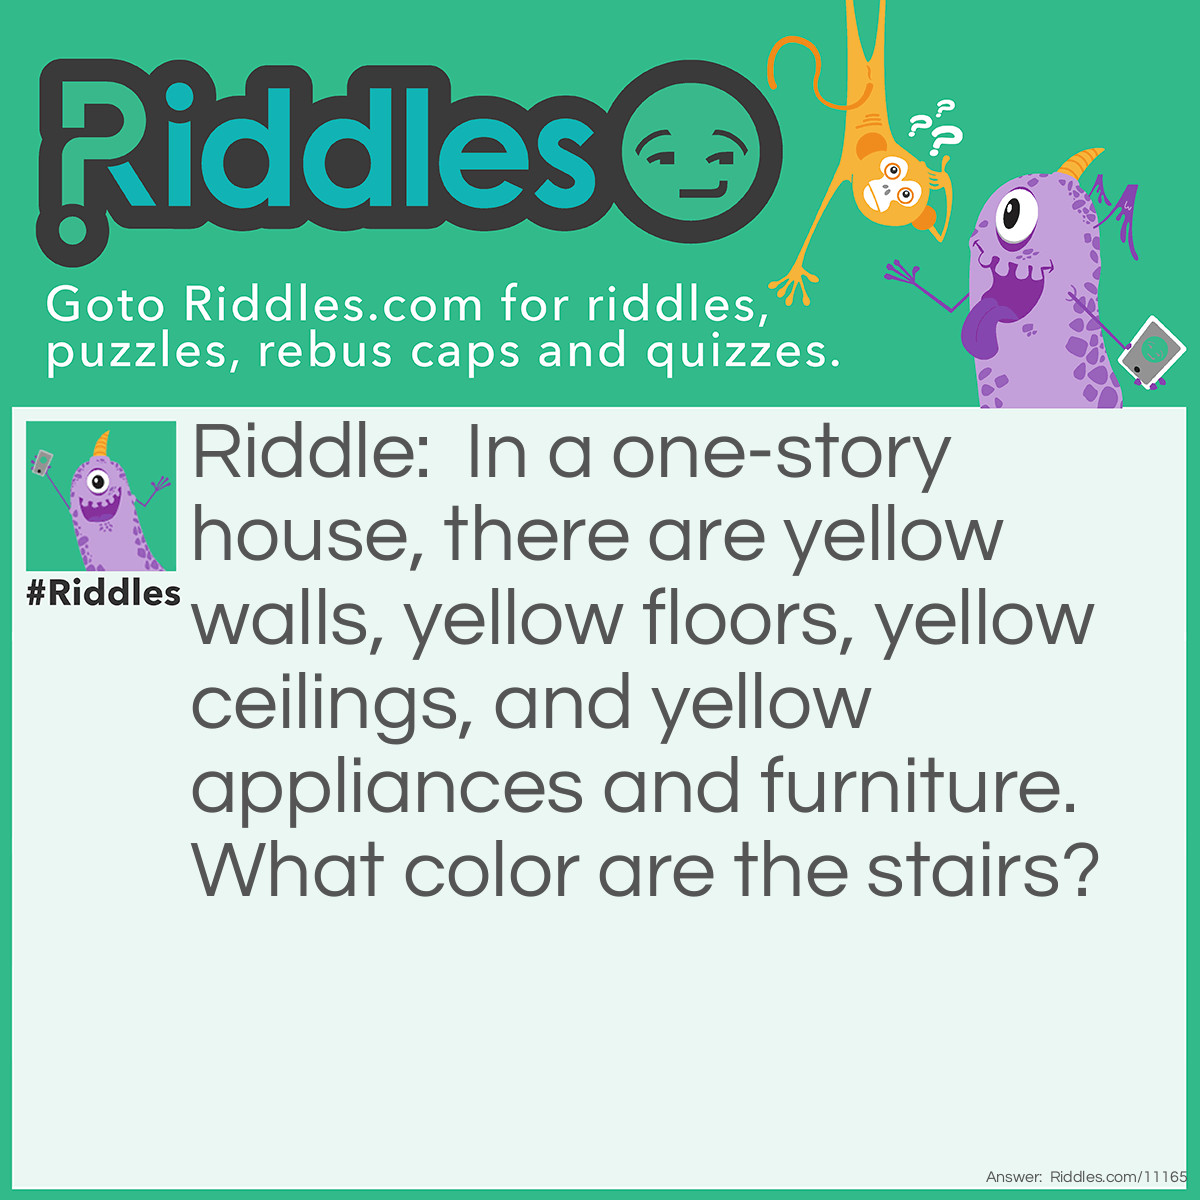 Riddle: In a one-story house, there are yellow walls, yellow floors, yellow ceilings, and yellow appliances and furniture. What color are the stairs? Answer: There are none.